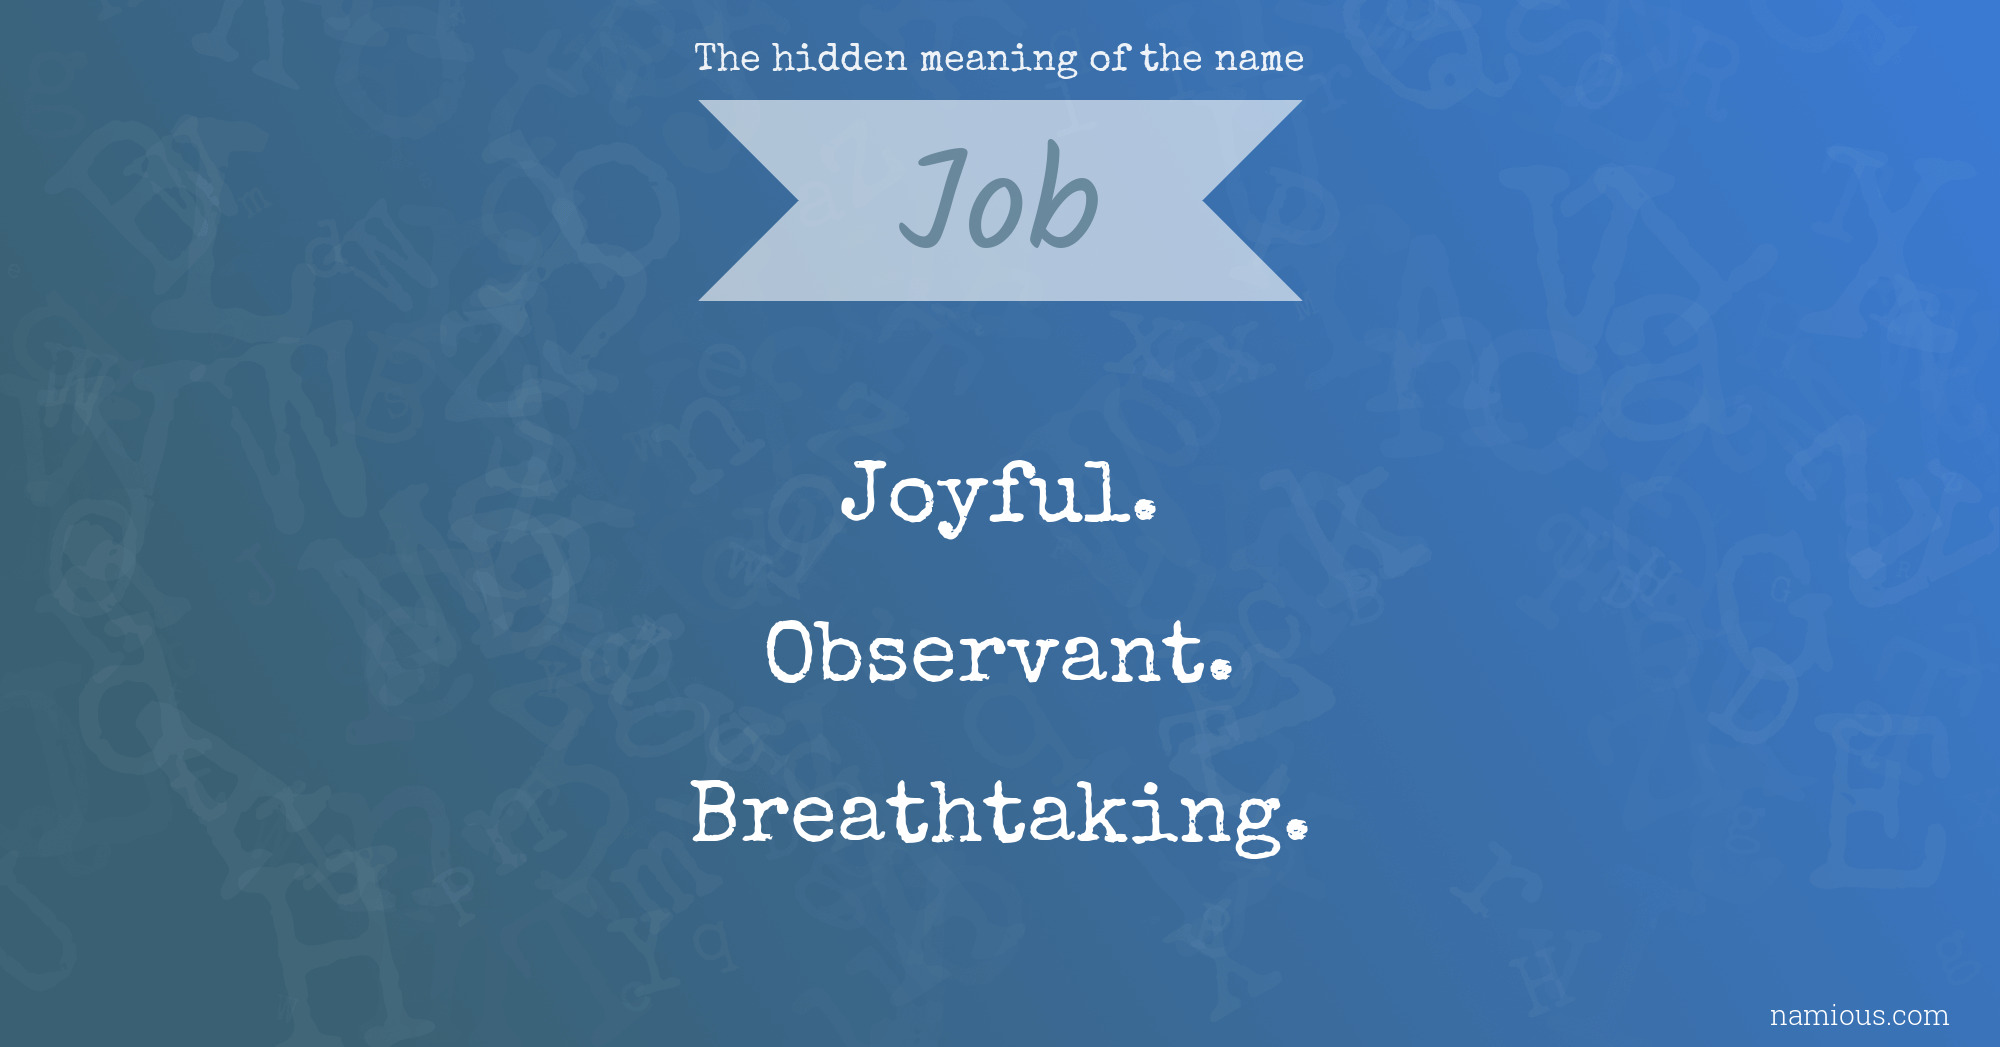 The hidden meaning of the name Job